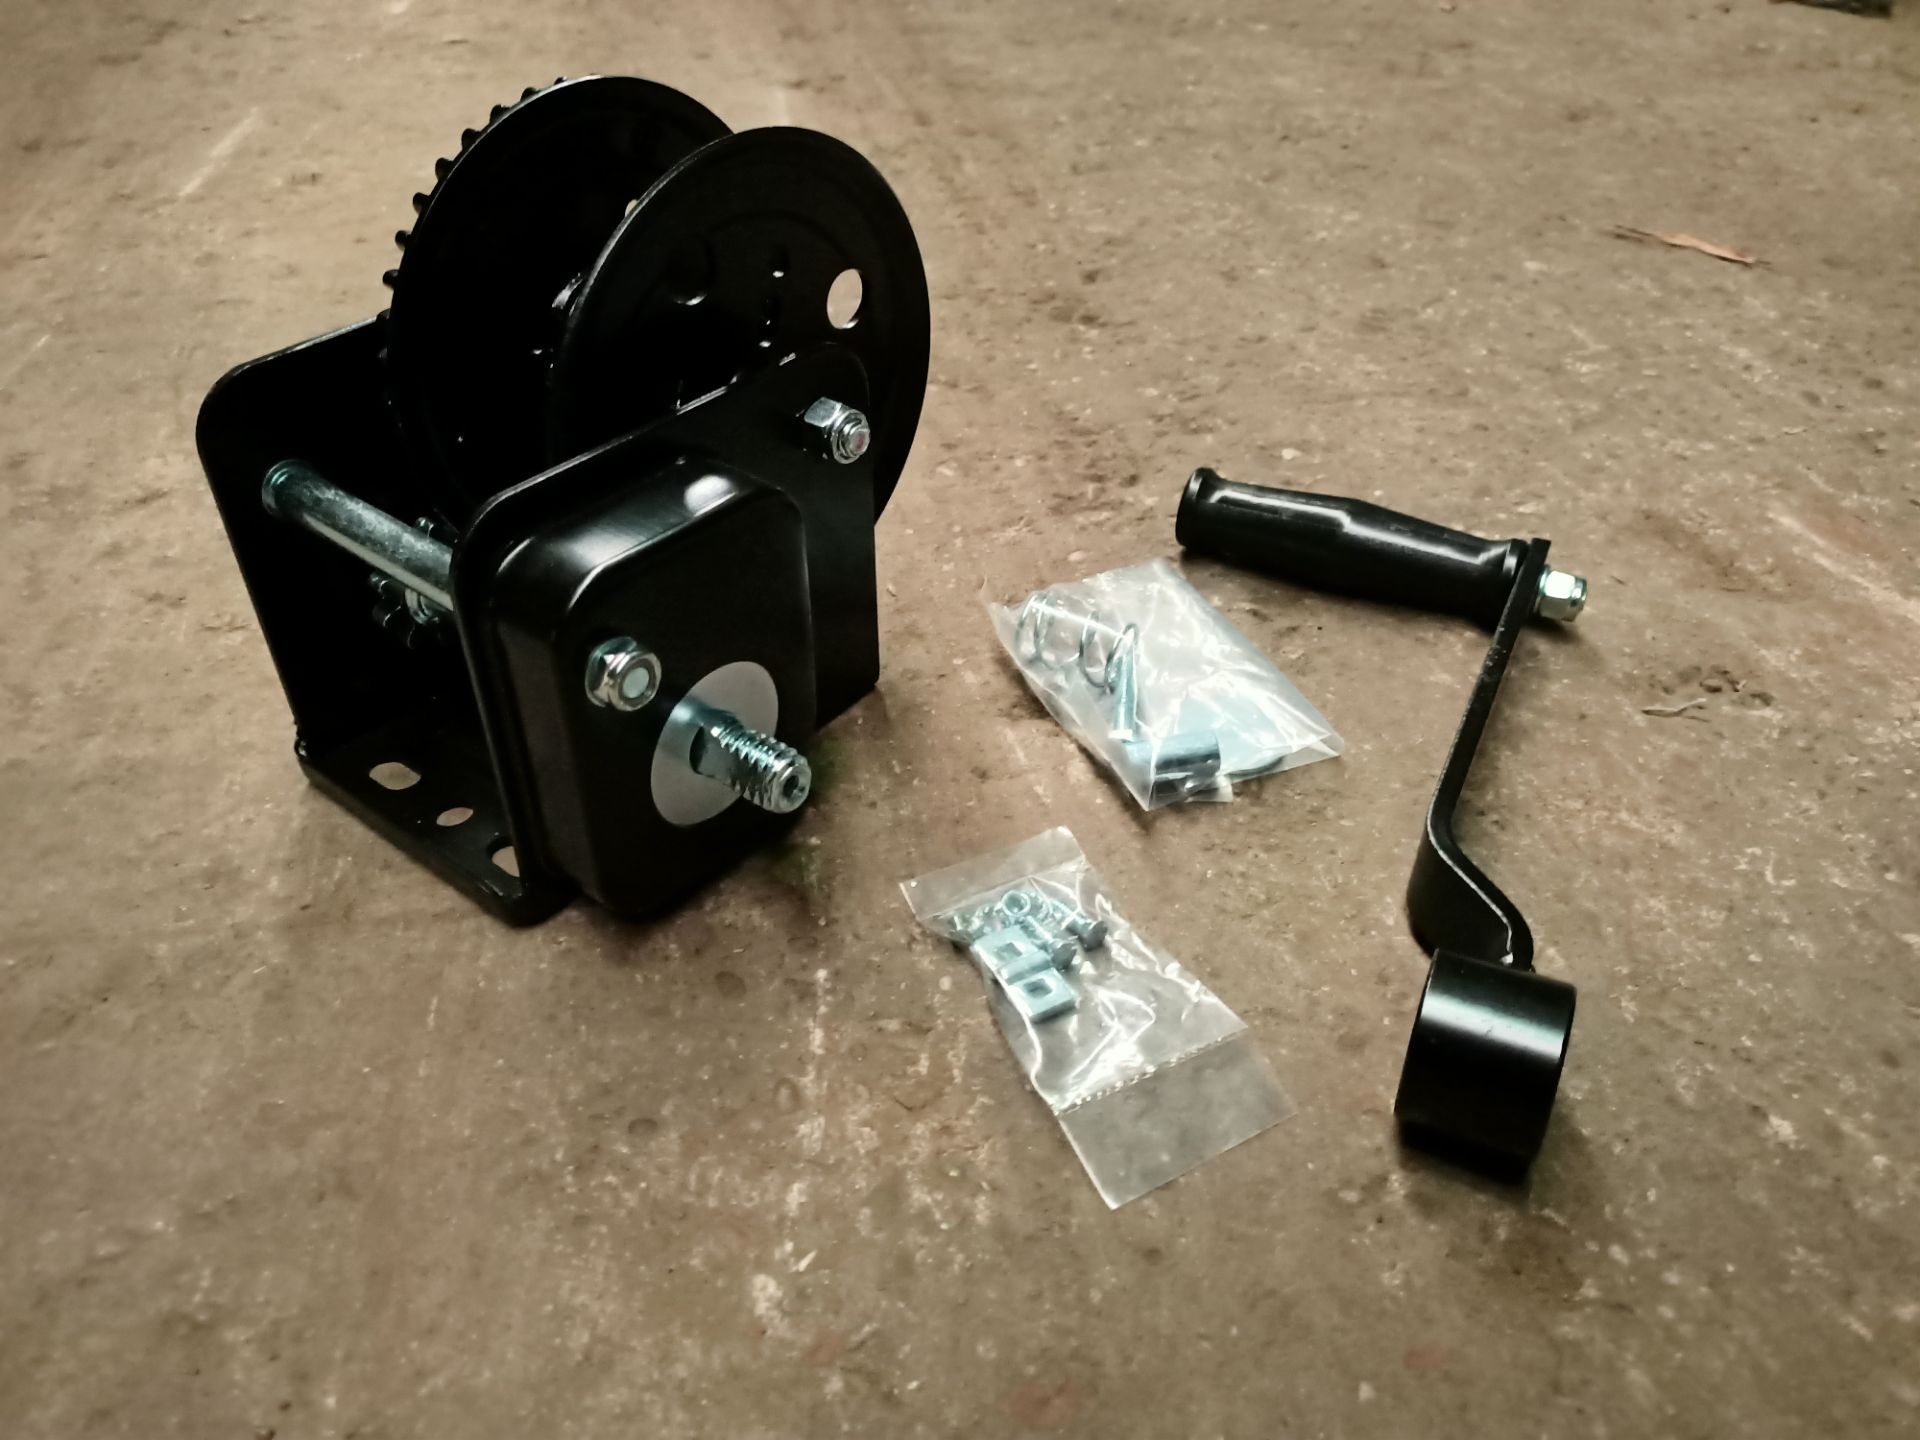 1 X 2000Lbs Black Hand Winch With Brake (Not For Lifting) (Hwb20)